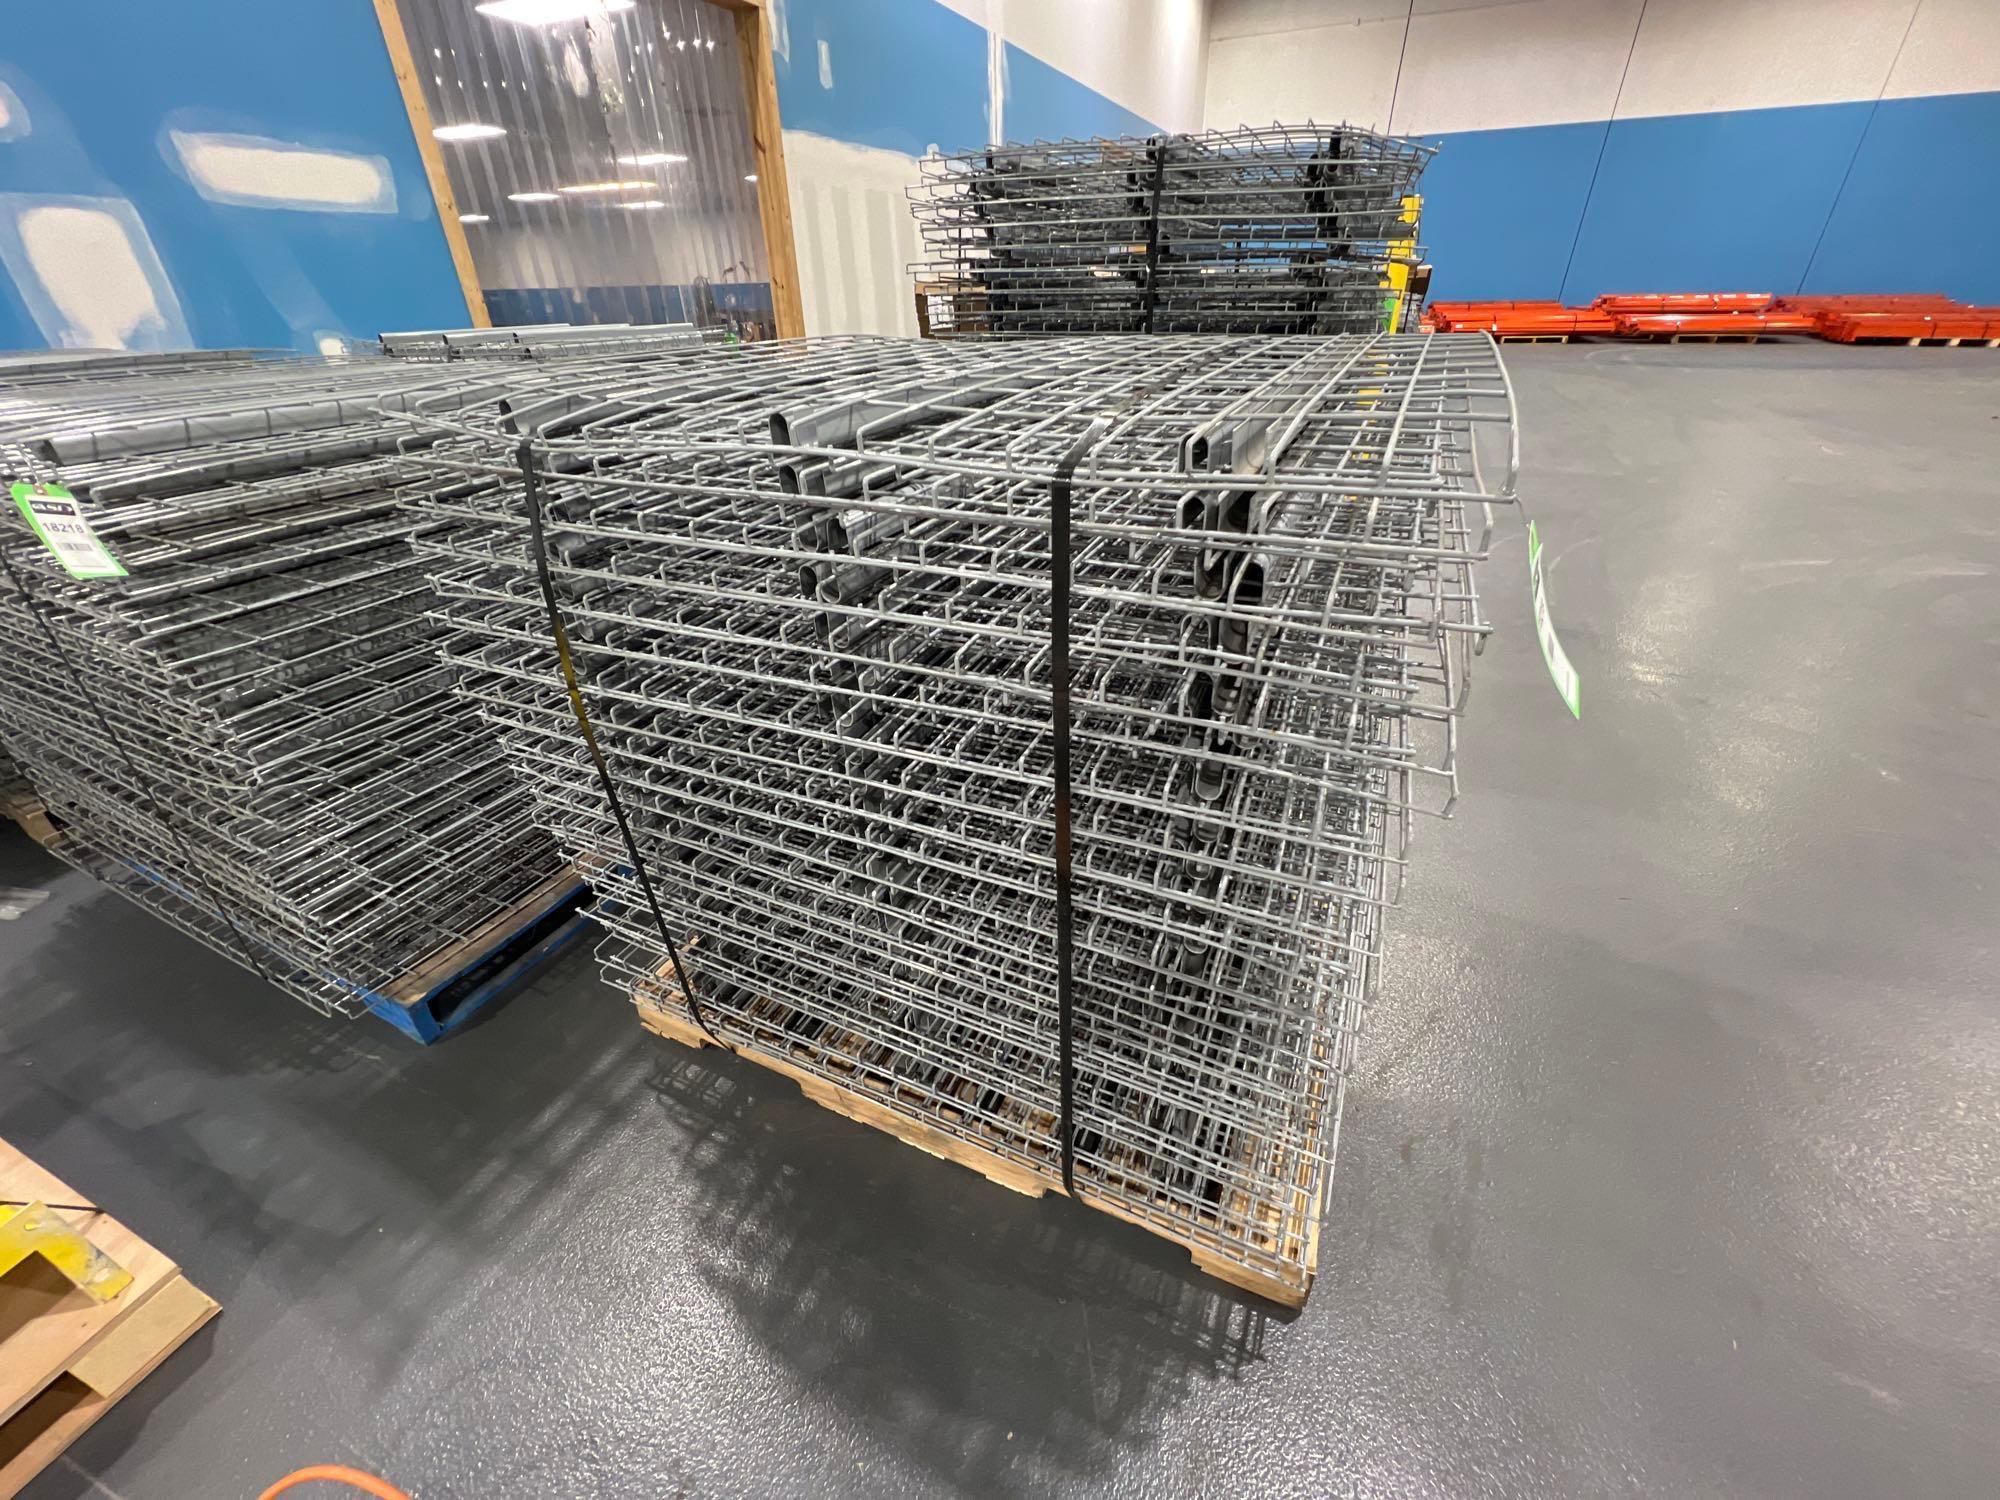 PALLET OF APPROX. 42 WIRE GRATES FOR PALLET RACKING, APPROX. DIMENSIONS 43" X 45"